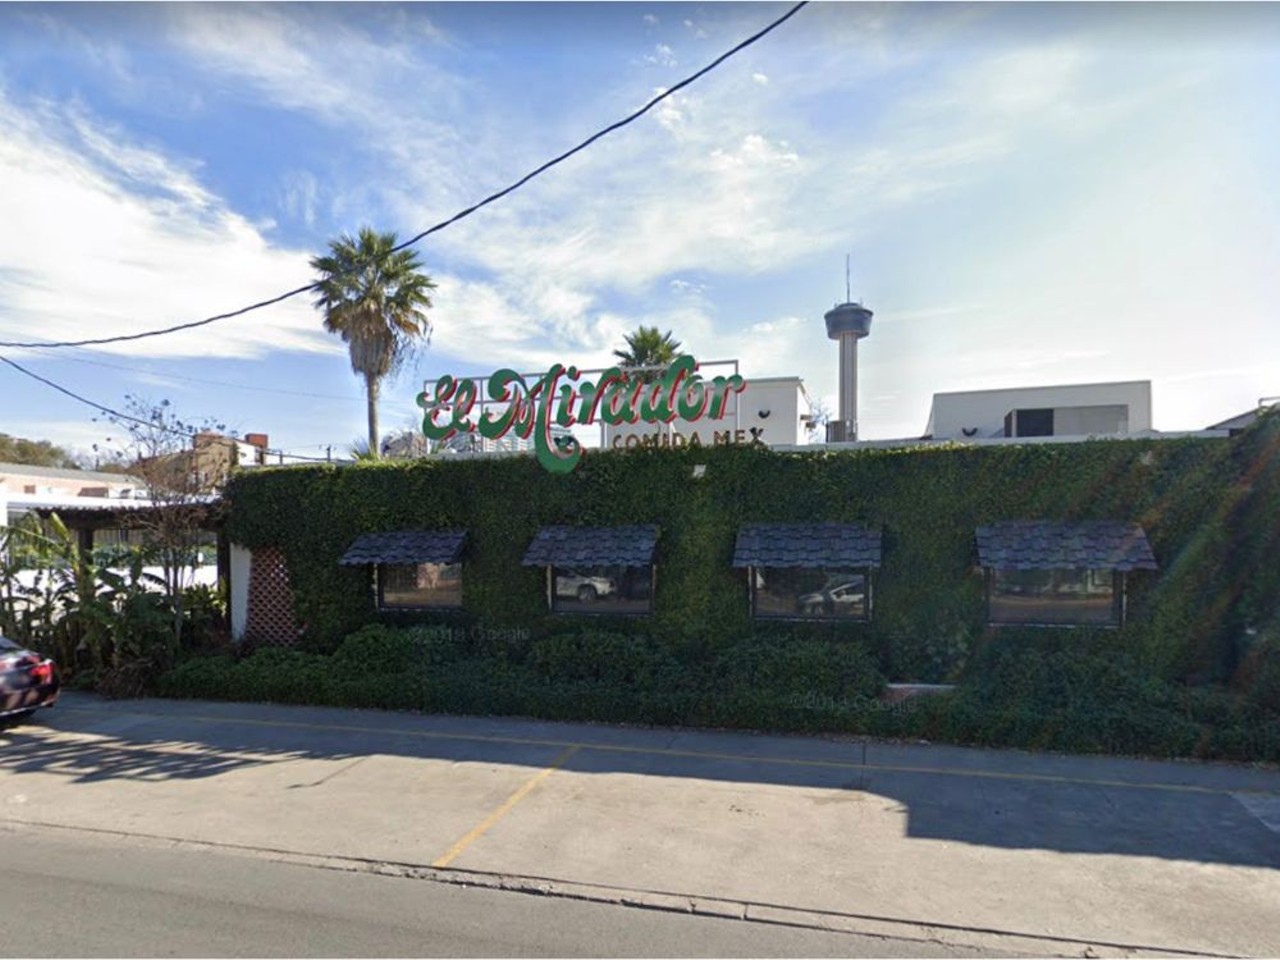 El Mirador
722 S. St. Mary's St.
Southtown mainstay El Mirador closed its doors in November of 2018. Four years after purchasing the restaurant from the founding Treviño family, Chris Hill decided to sell the property to restaurateur Lisa Wong, who operates Mexican mainstays Rosario’s and Ácenar. Wong demolished the El Mirador restaurant building and built the new flagship Rosario’s location in its place, which opened in Spring 2023.